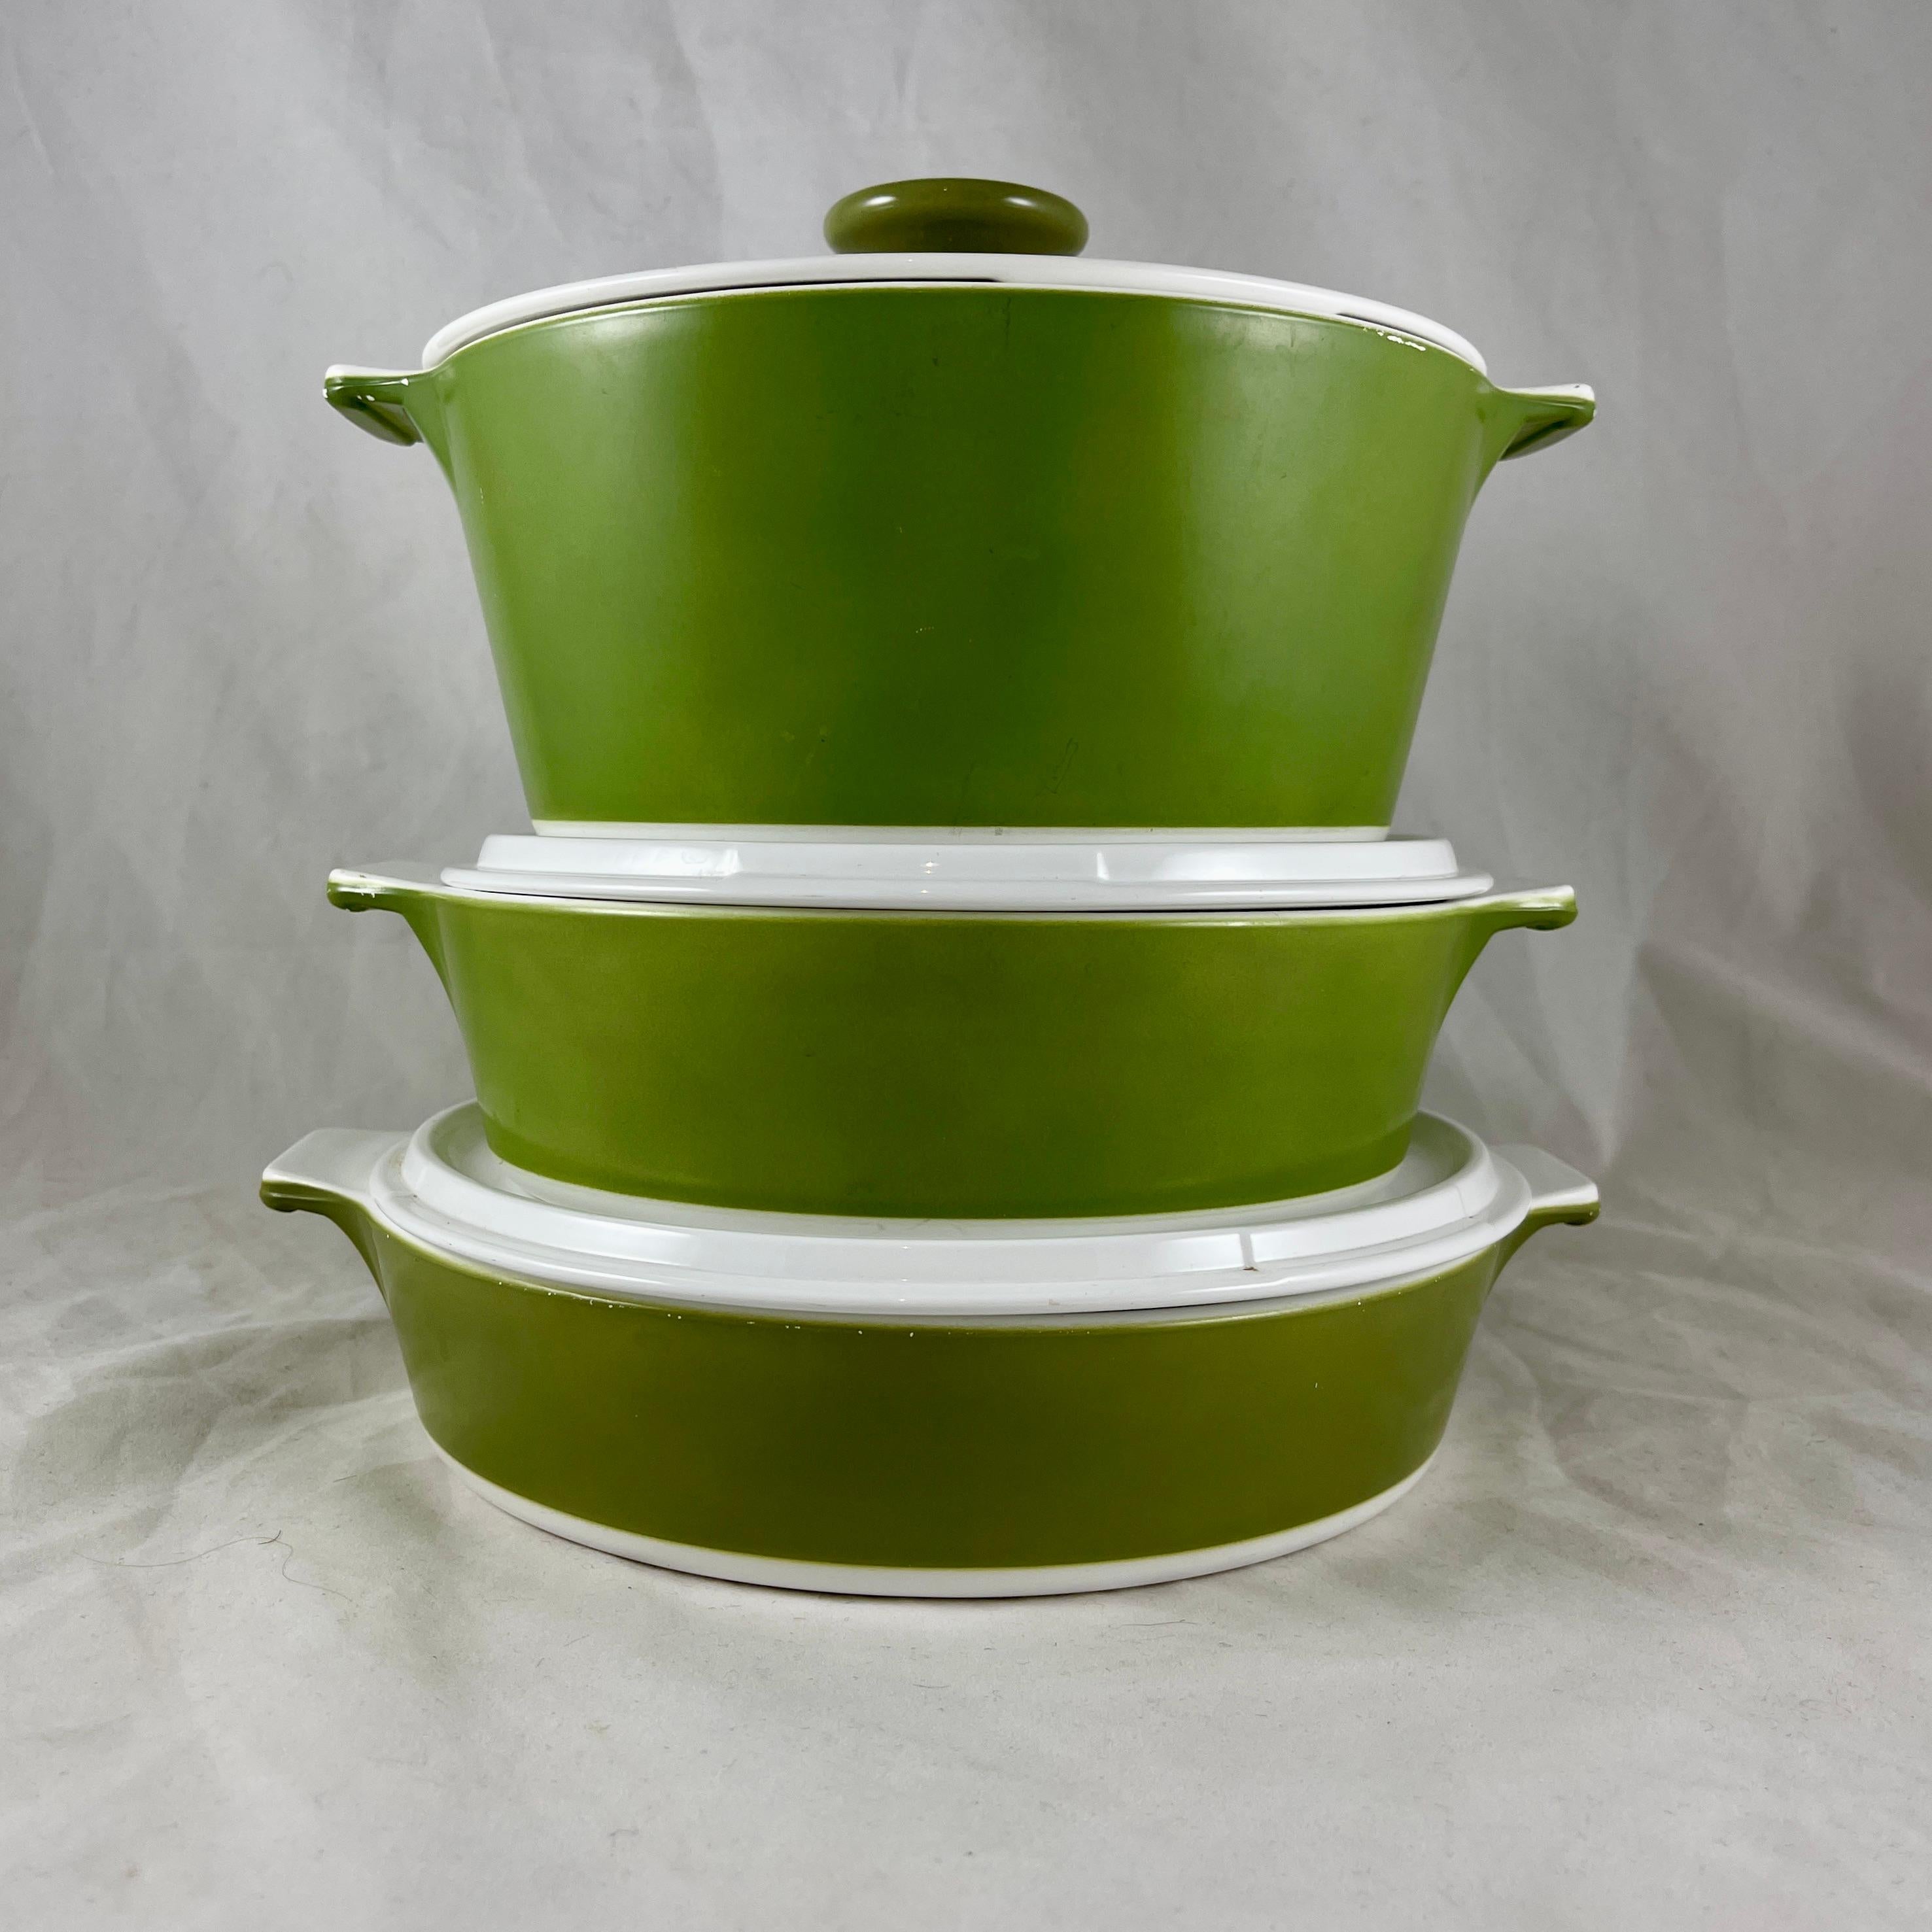 A set of three mid-century era Corning Ware casserole dishes from the ‘Avocado Round’ line, circa 1968-1970.

Corning Ware revolutionized the mid-century kitchen and the original pieces are now considered to be highly collectible.

The covered